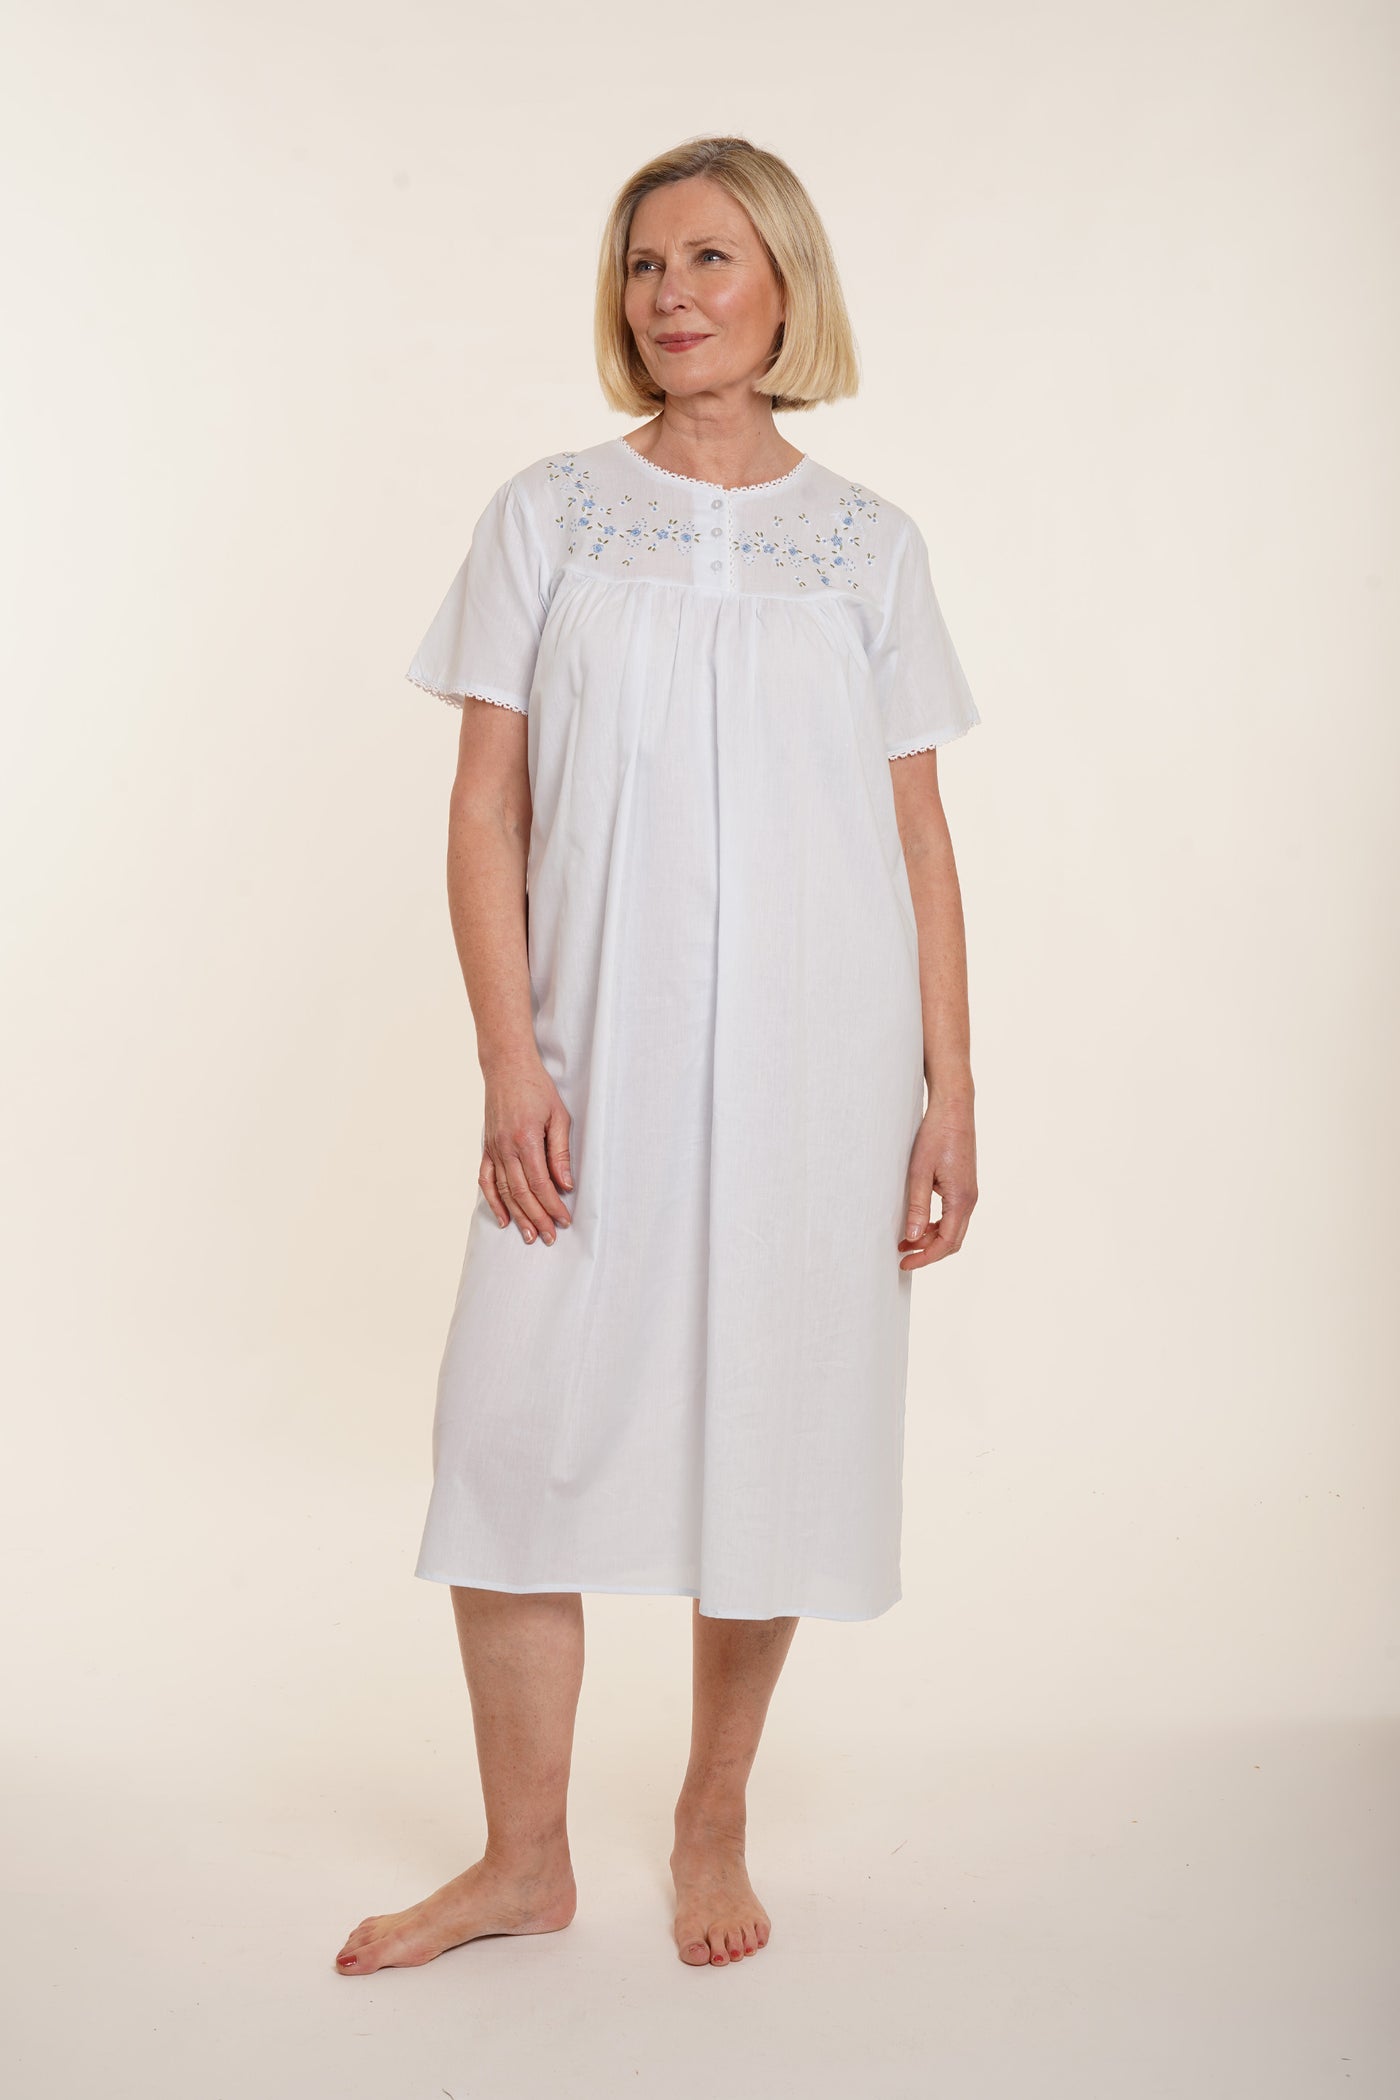 Embroidered Nightdress